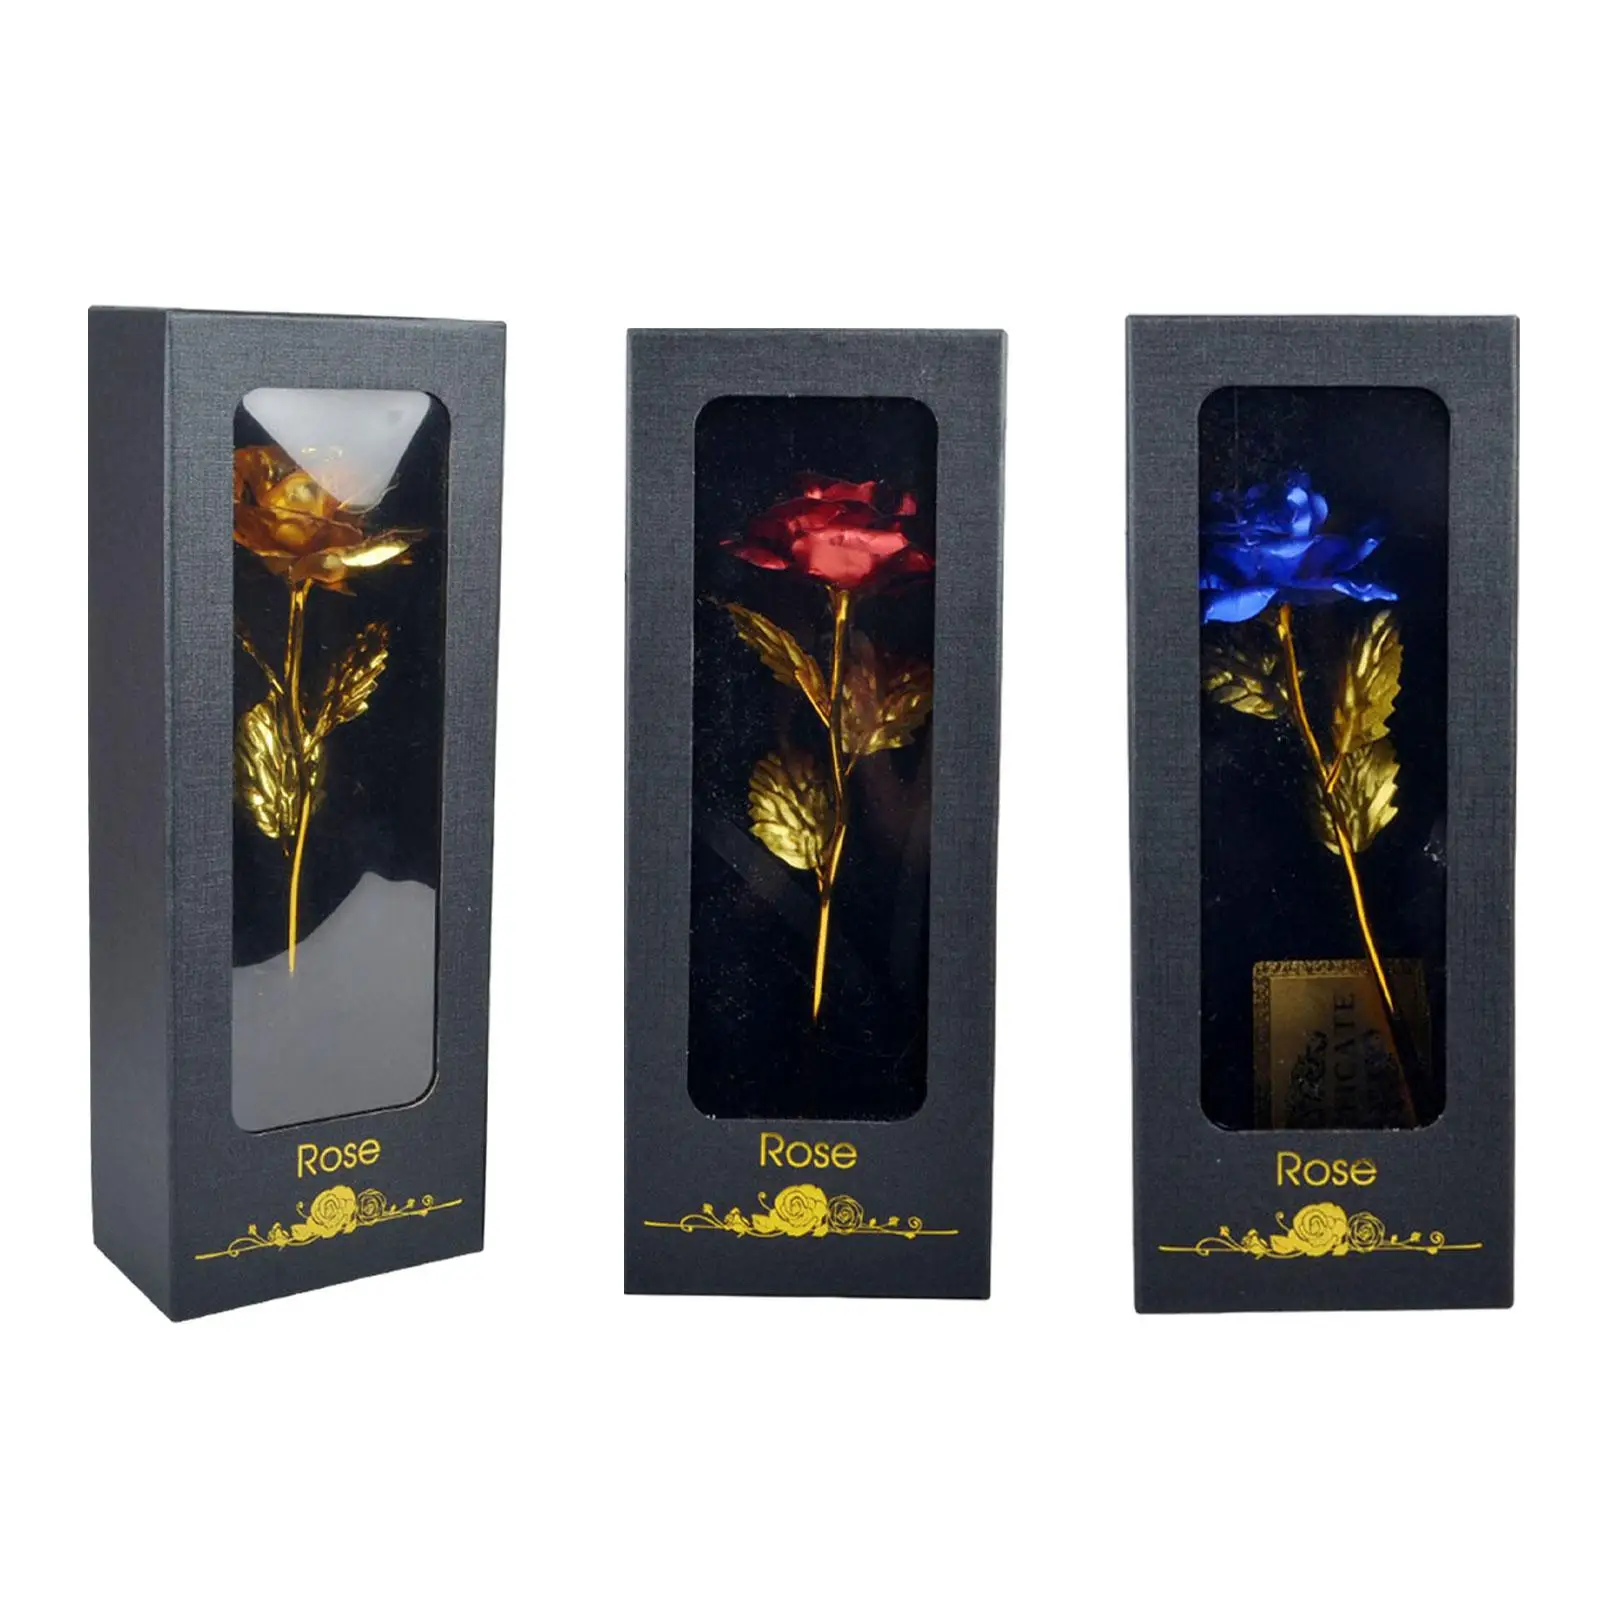 Rose Flower with Clear Window Gift Box Valentines Day Gift Exquisite Decorative Artificial Flowers for Wife Mom Friends Hotel